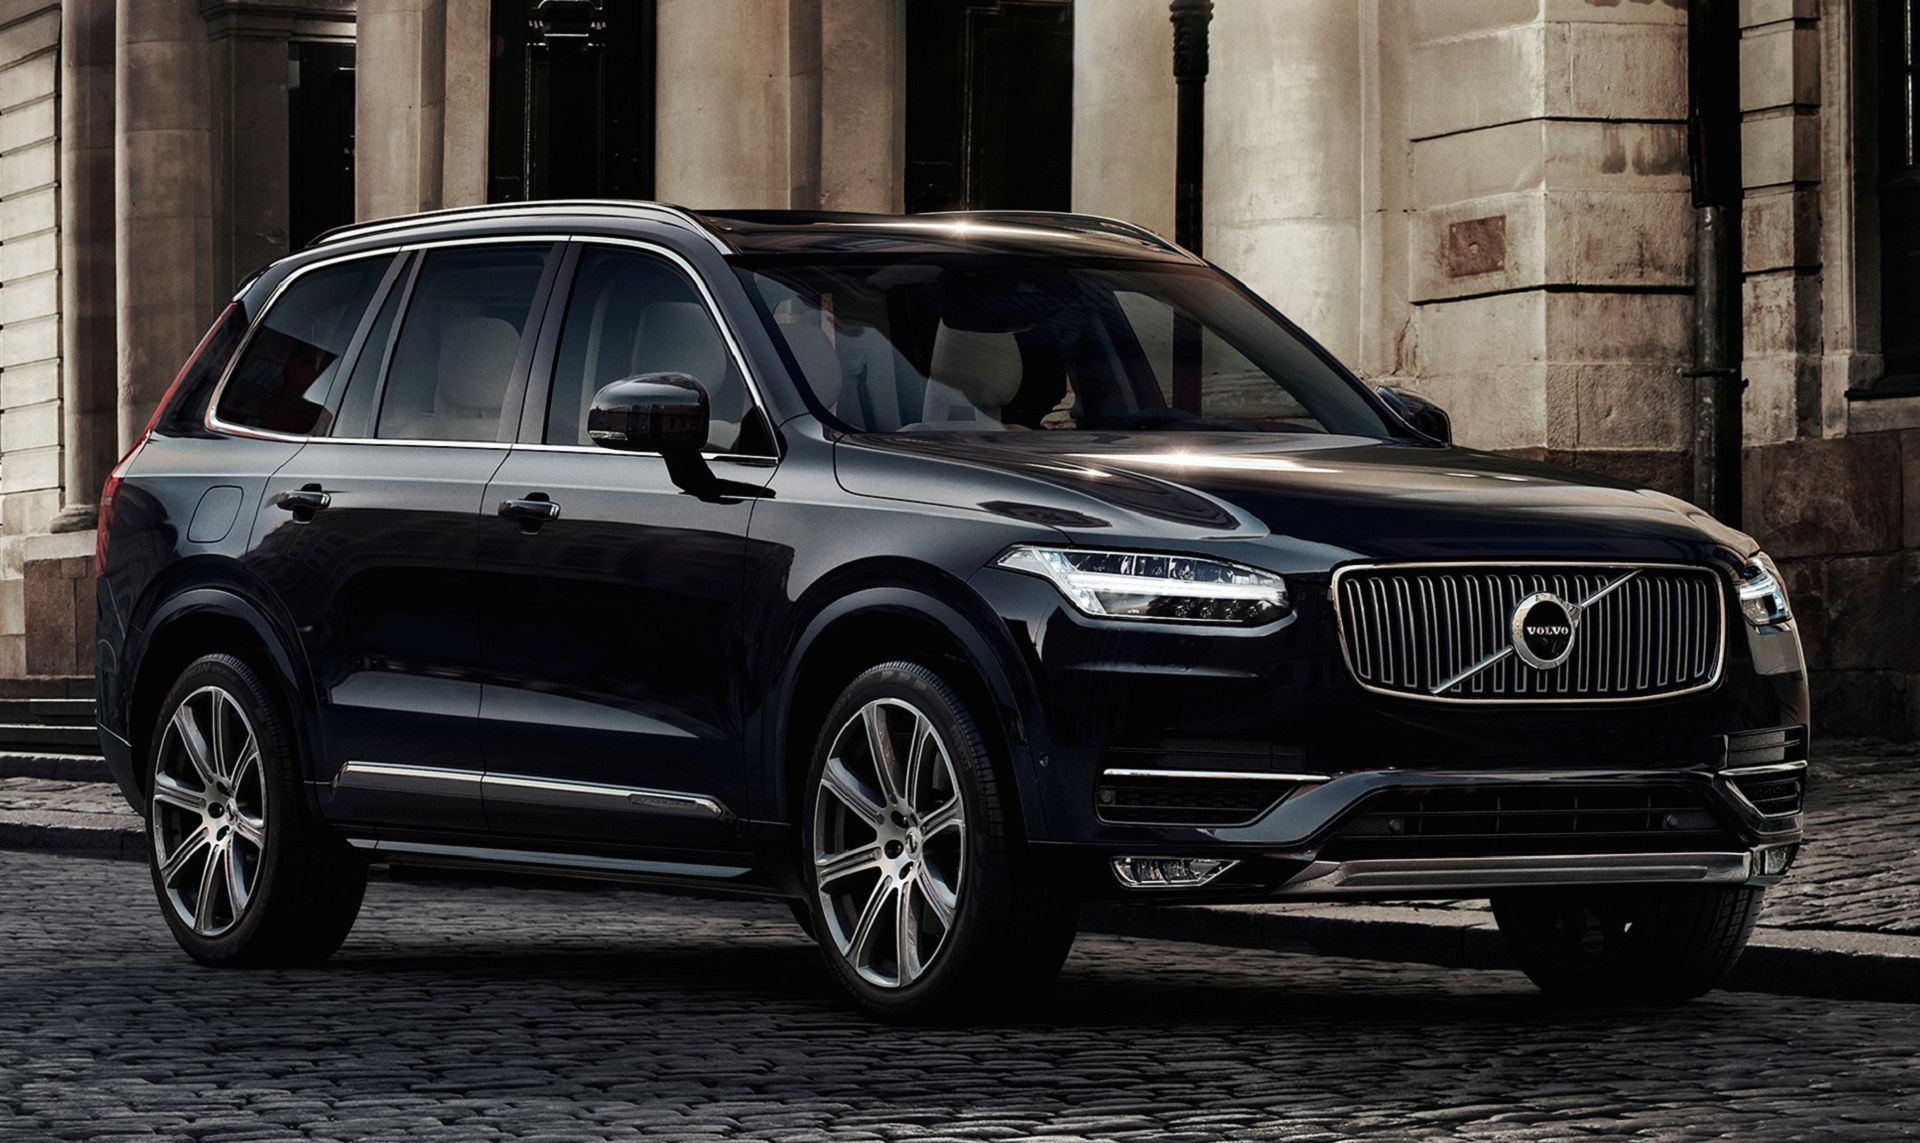 Volvo XC90 Wallpaper Image Photo Picture Background